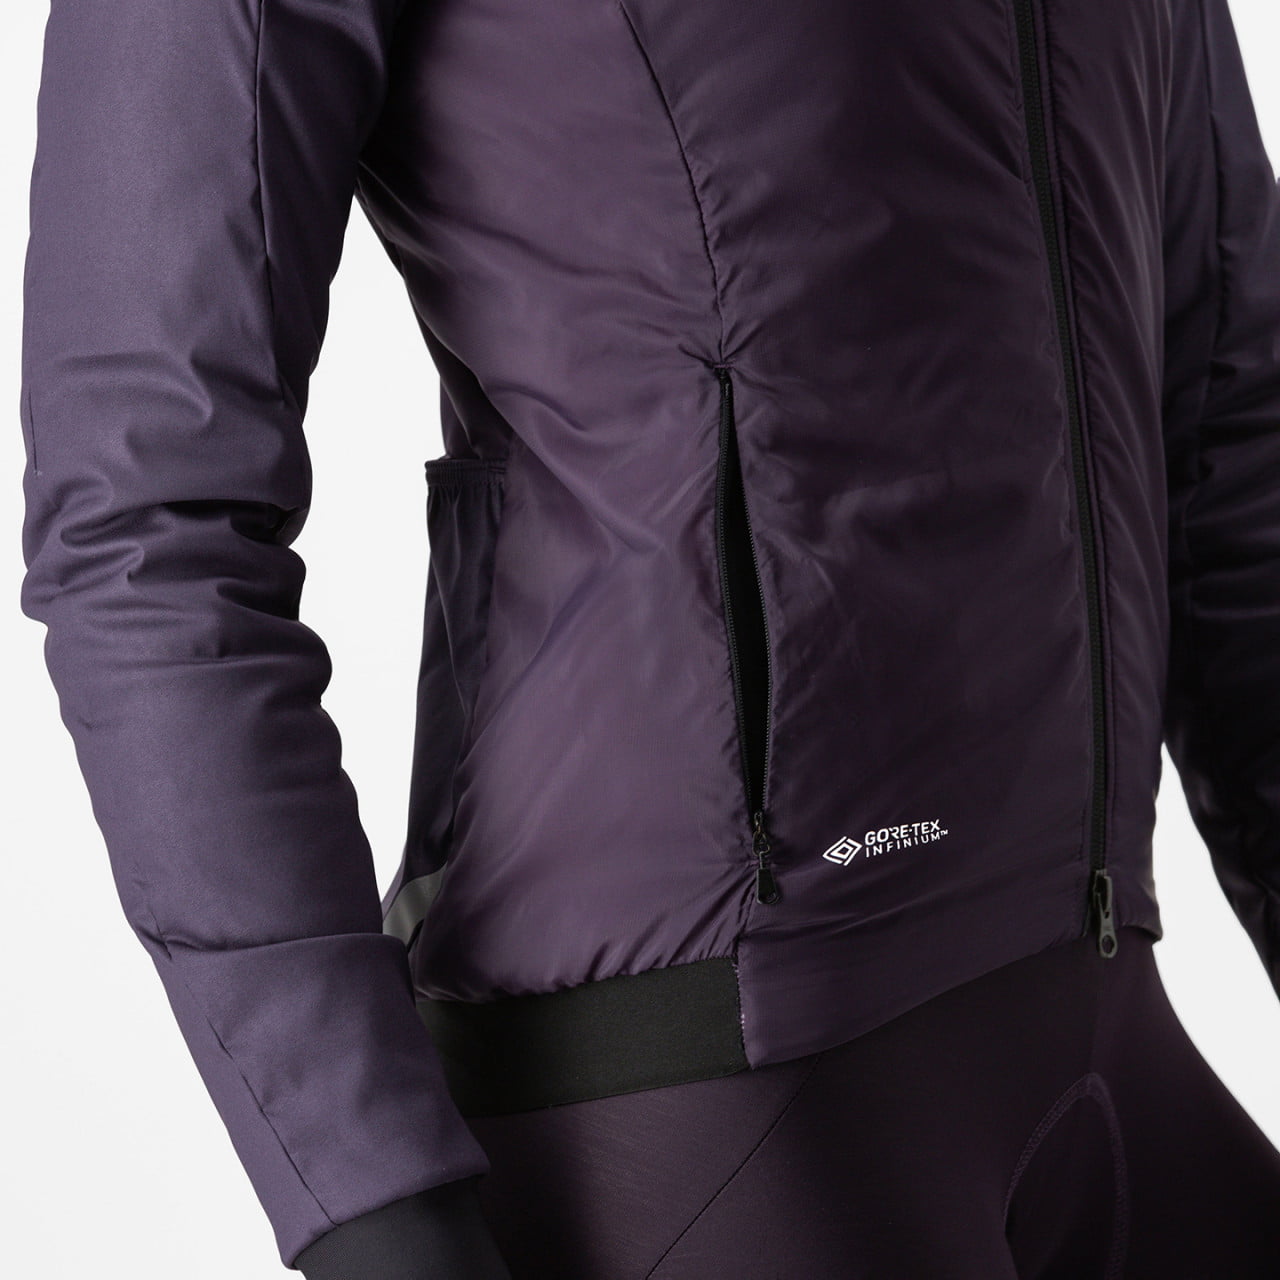 Giacca invernale da donna Fly Thermal